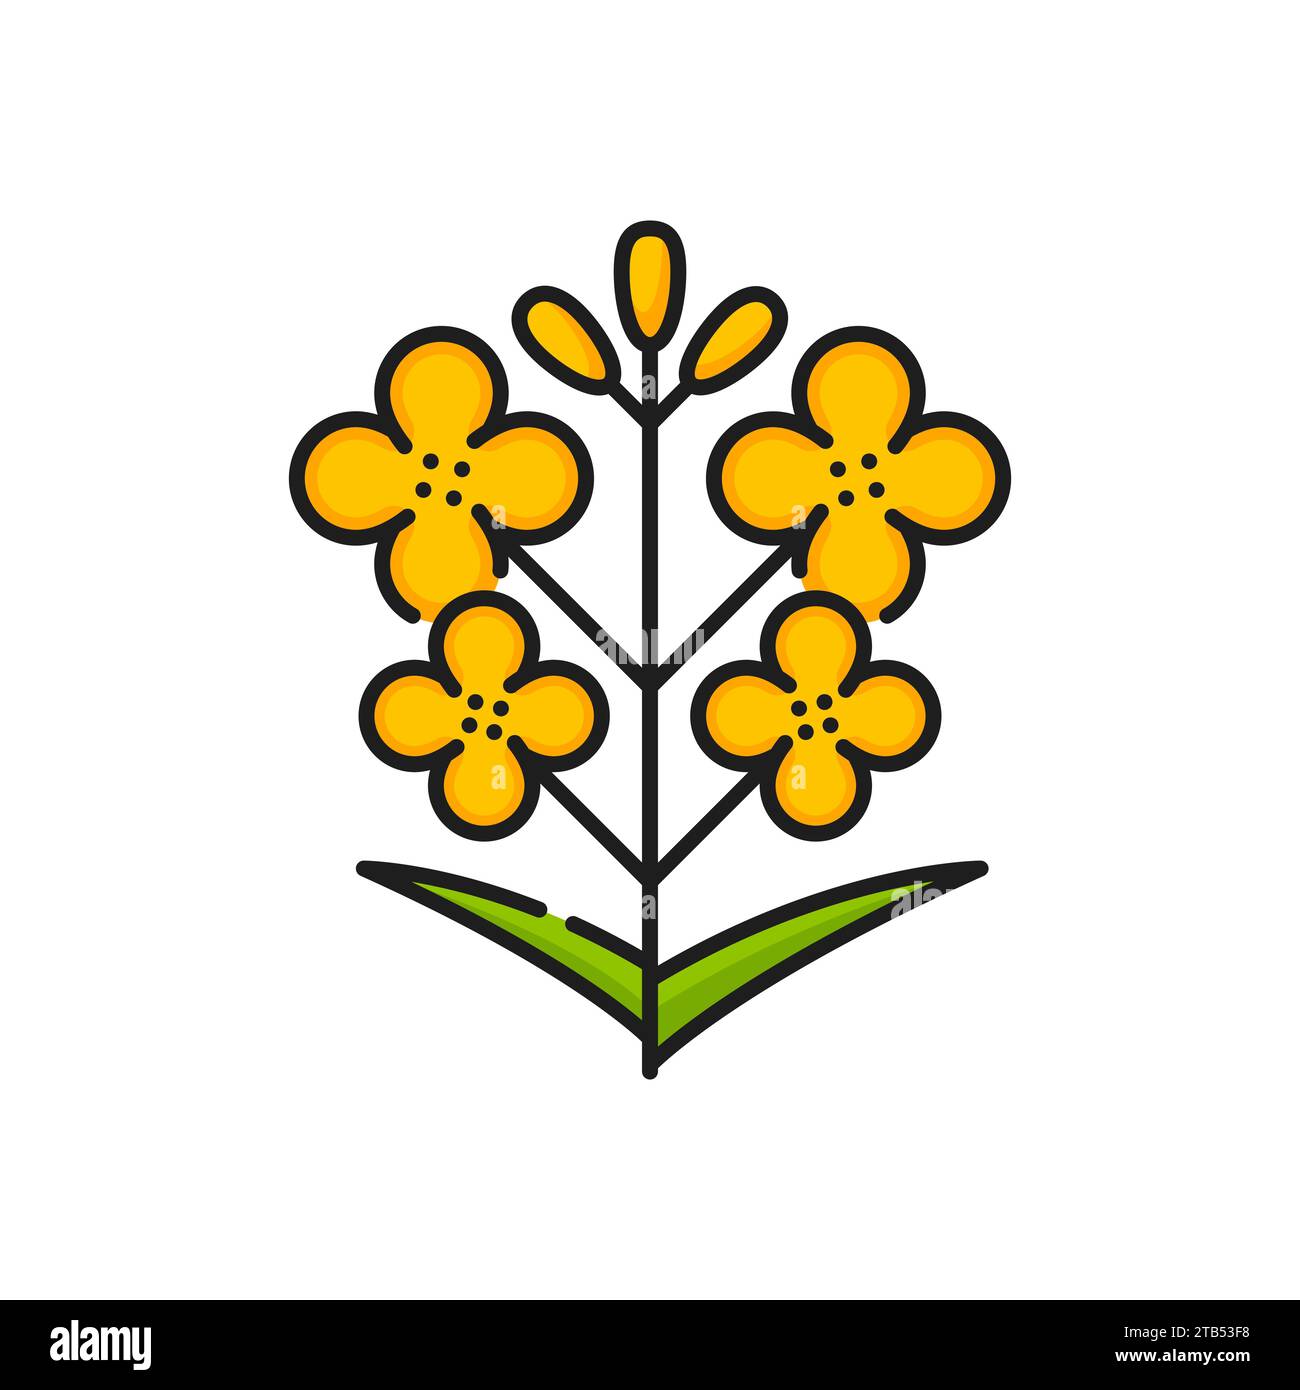 Rapeseed, canola plant icon. Isolated vector linear sign of golden Brassica napus or colza bloom with its distinctive yellow petals, symbolizing its significance in agriculture and oil production Stock Vector